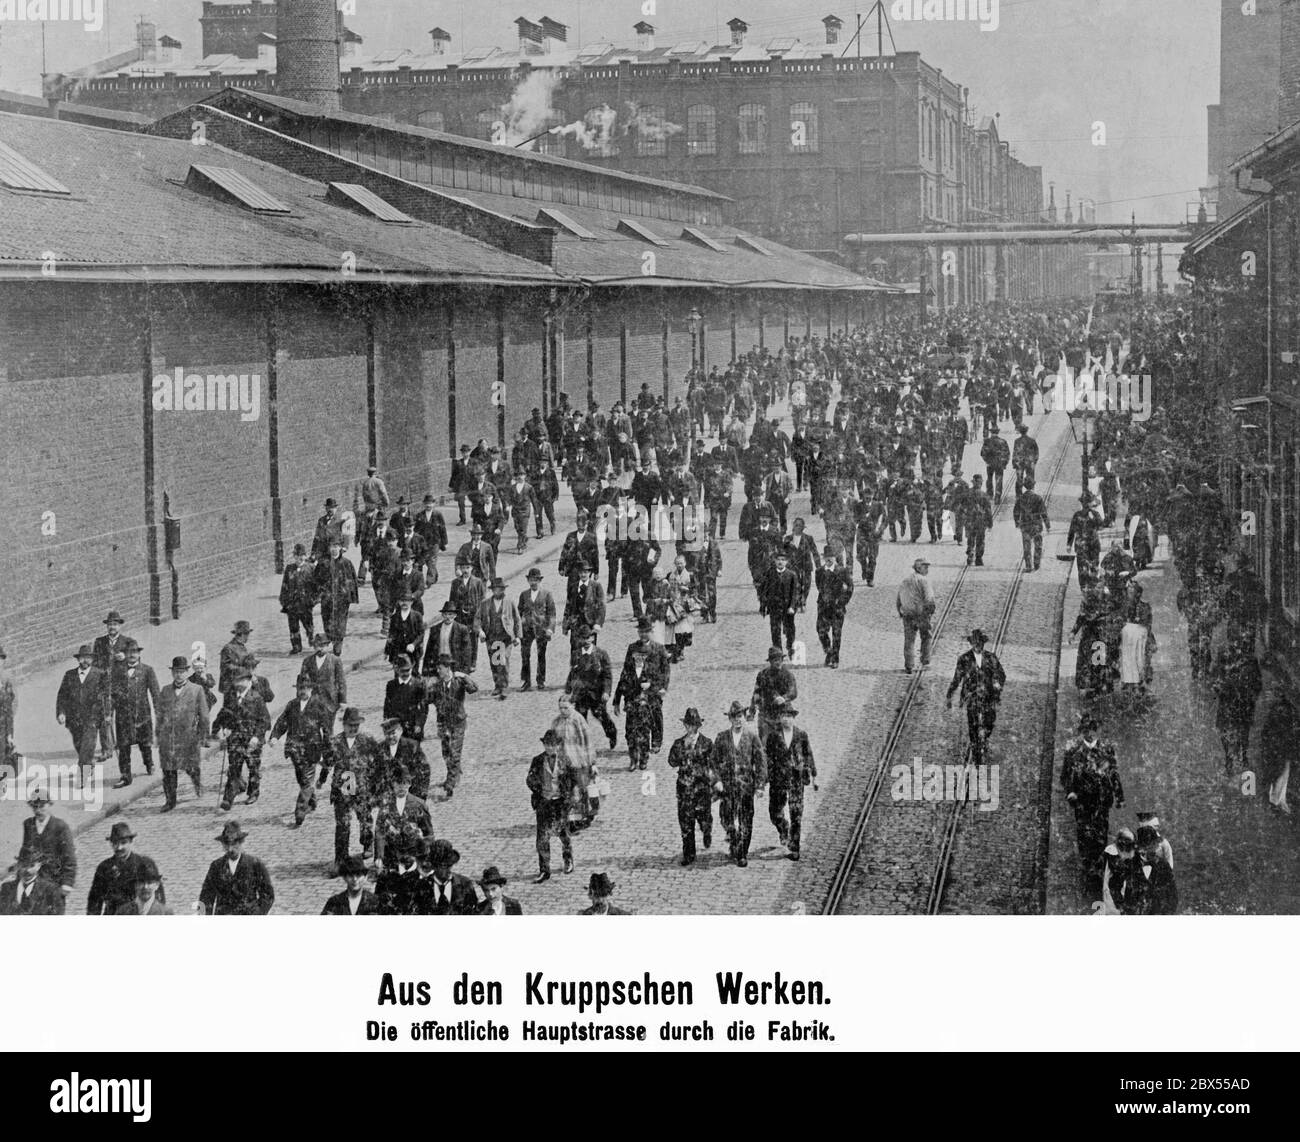 During shift changes in the Krupp works, a crowd of workers walk along the public main road through the factory. Stock Photo